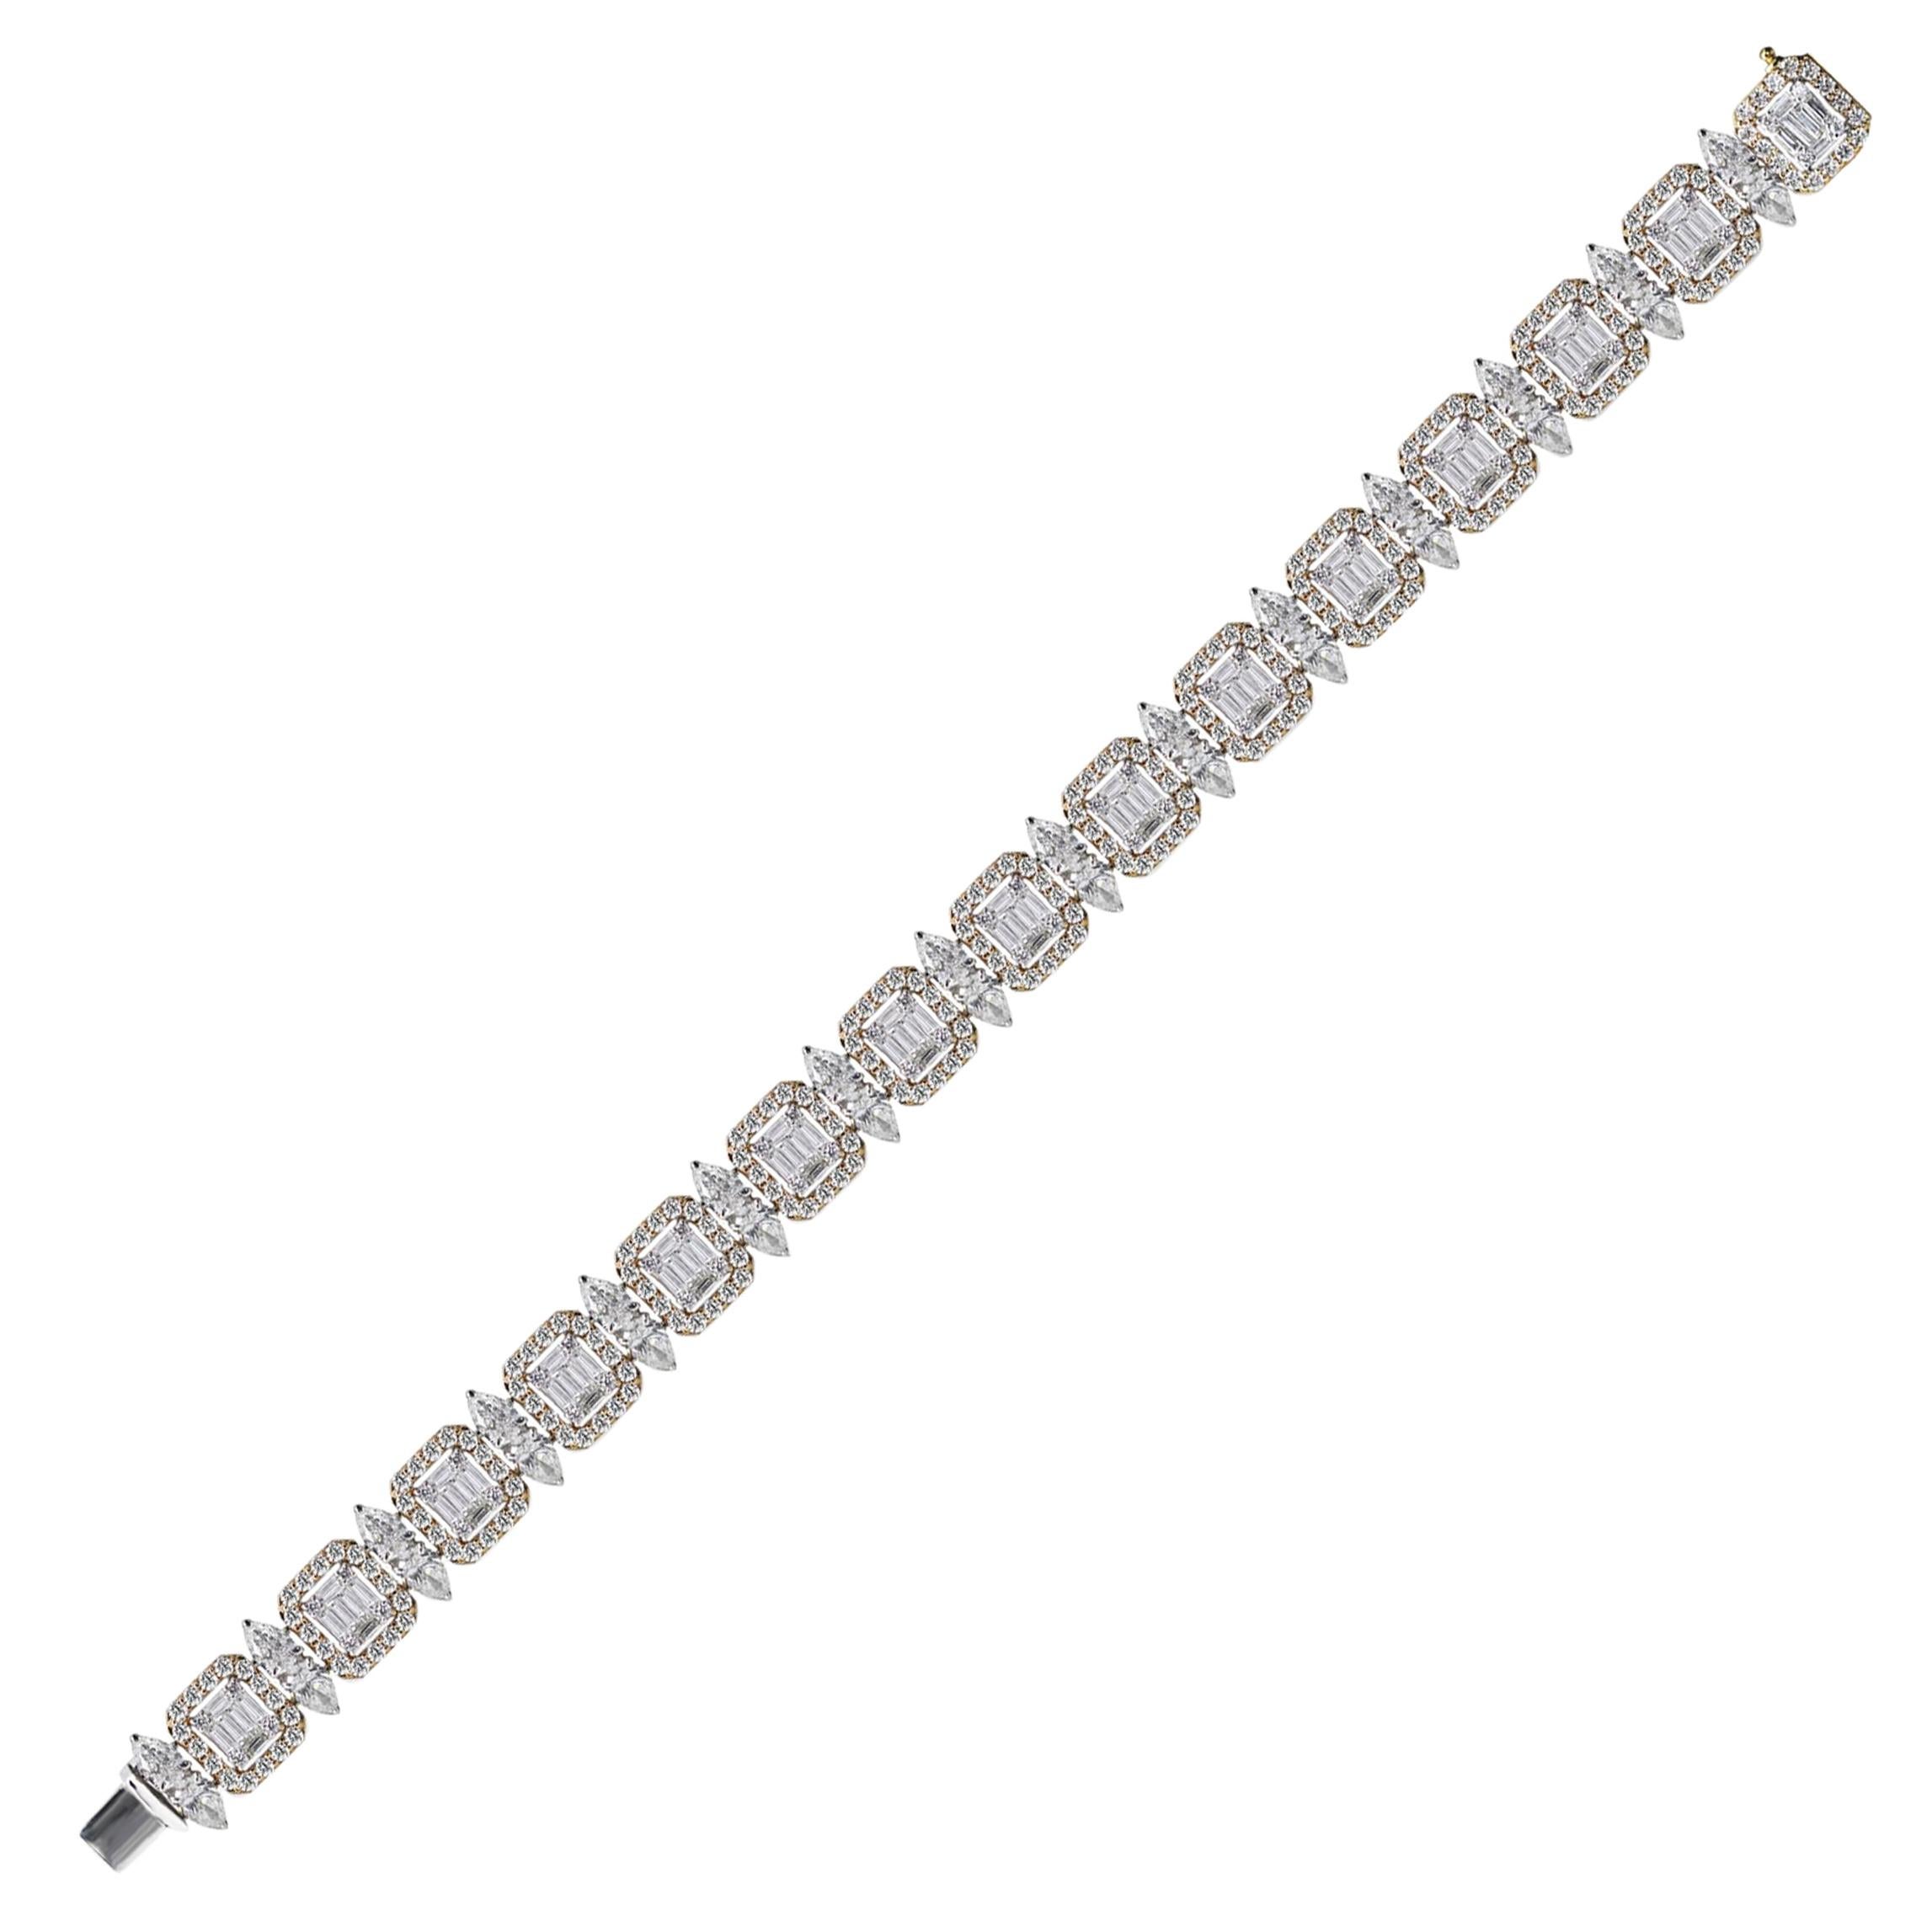 F-G-H / VS -SI brilliant cut diamonds tennis bracelet

Saunter deep into the glory of a bygone era with this 18K white and rose gold tennis bracelet featuring F-G-H color VS-SI handpicked, brilliant cut diamonds in a modern-day prong and mosaic